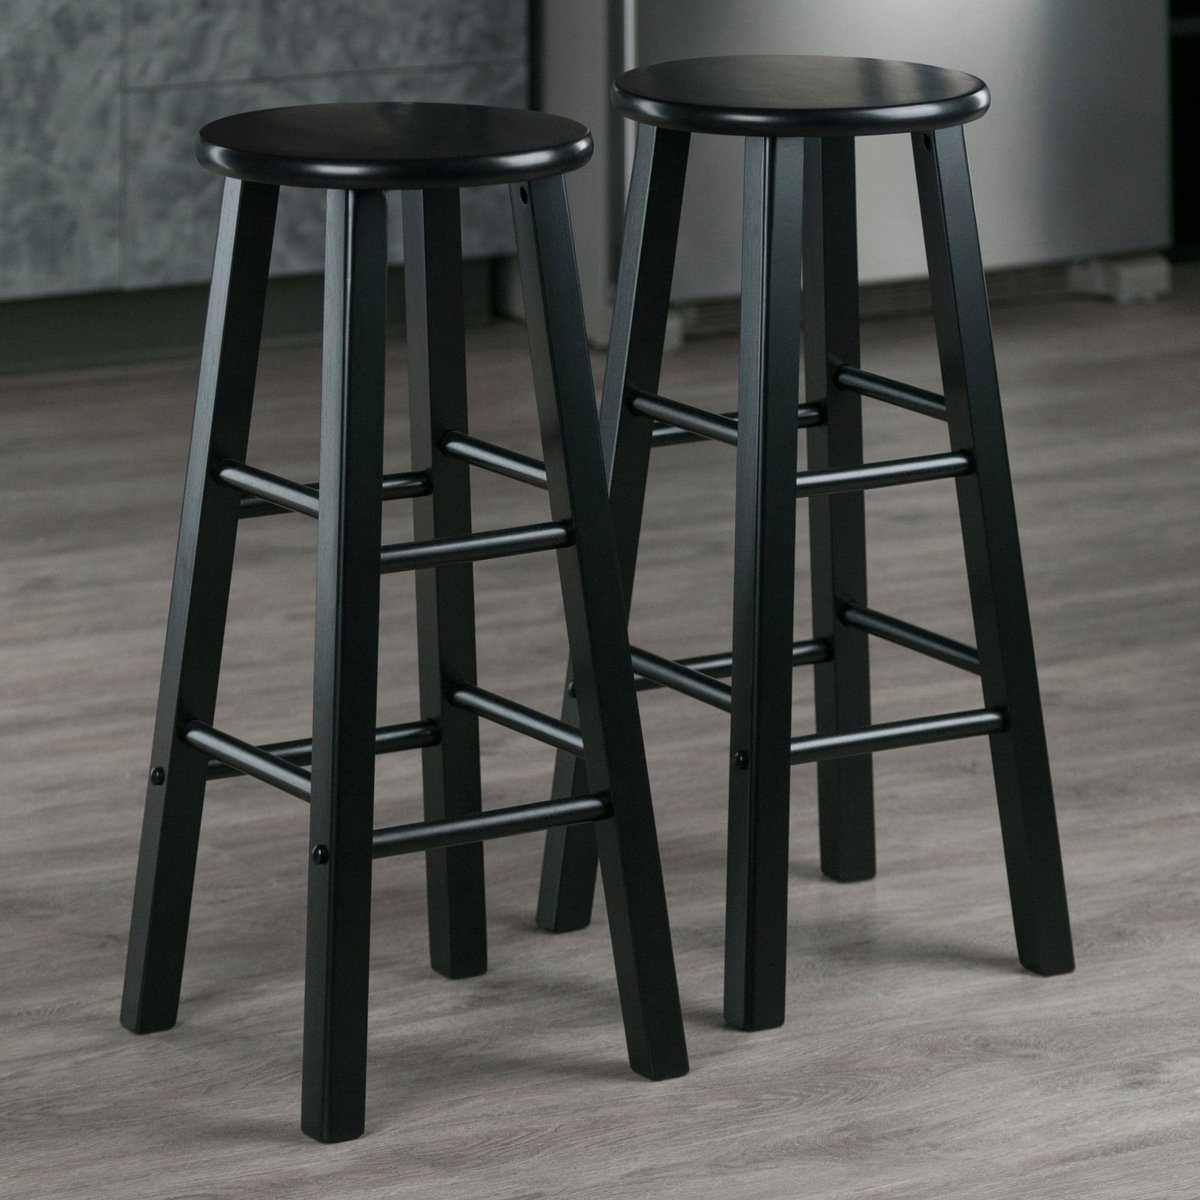 Set of 2 Philippe Bar Stools | 13.58'W x 13.58'D x 30.31'H | Solid Wood #ModernLiving #DecoratingIdeas
$118.99
➤ bazaarmart.net/products/stool…